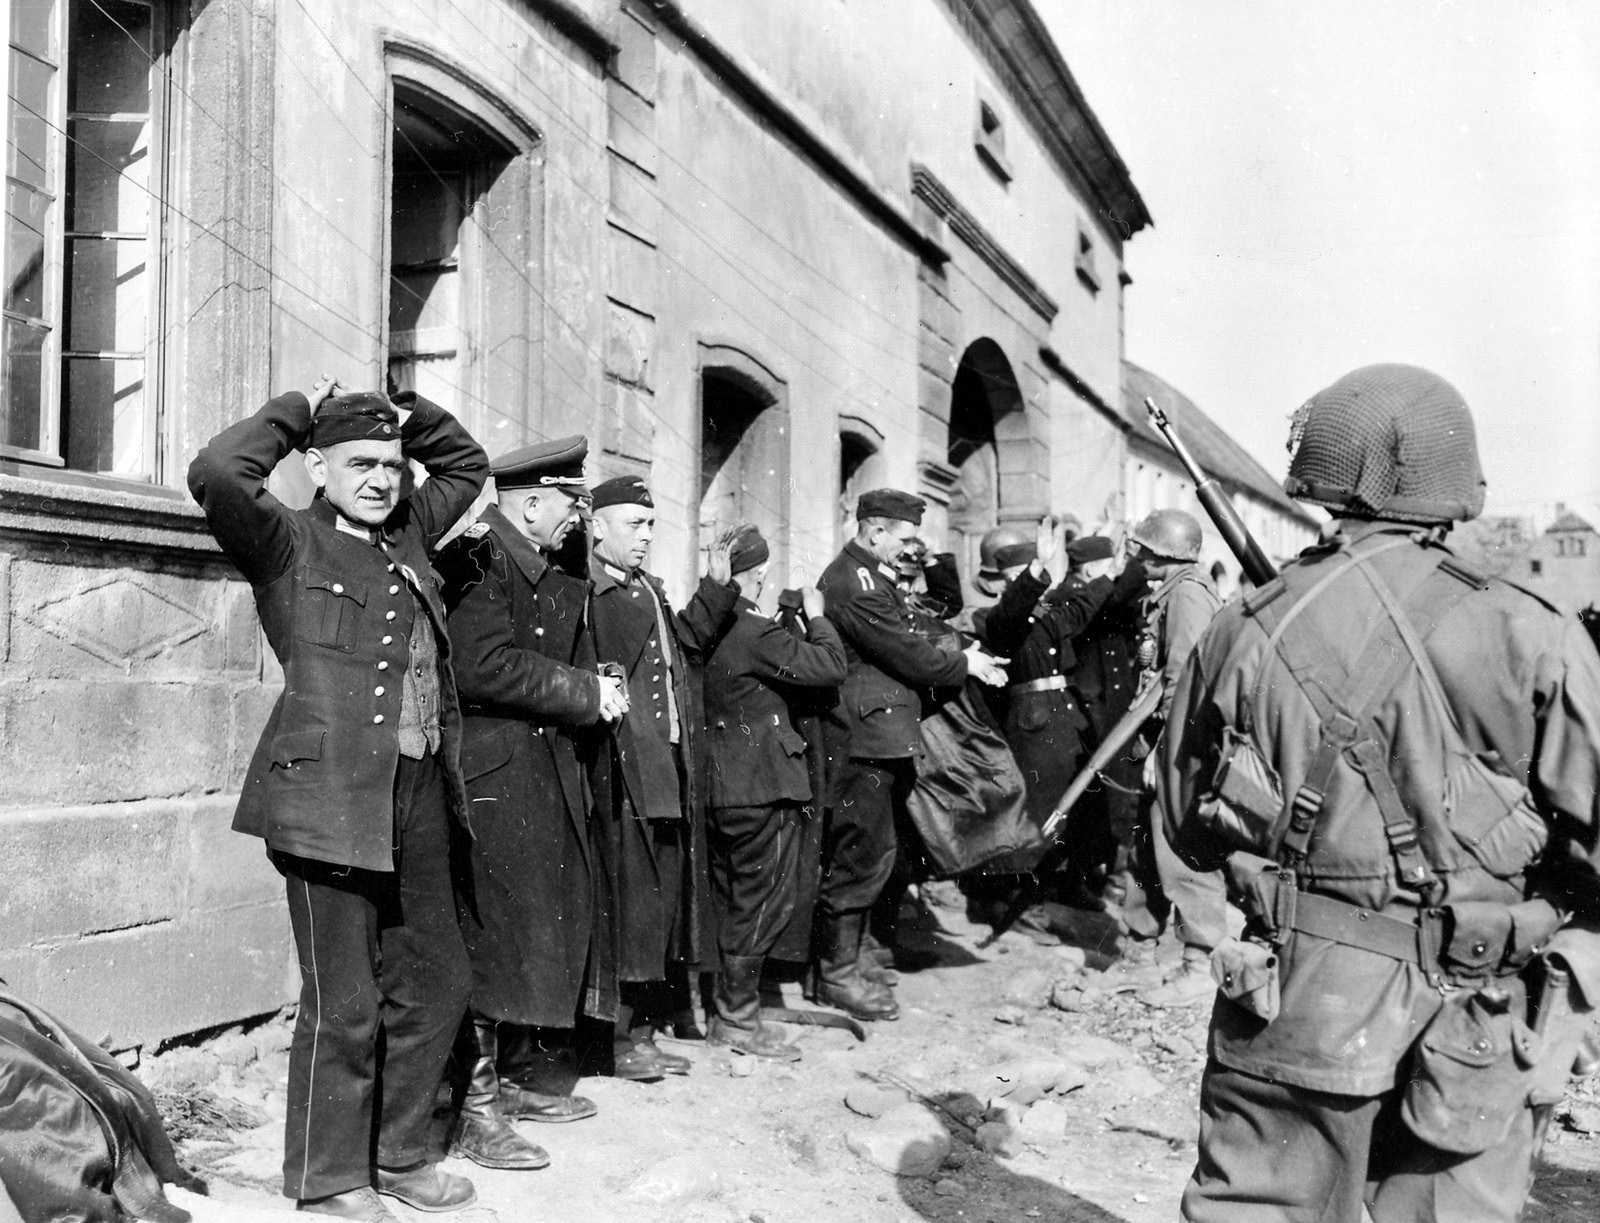 Having lost the will to fight, German troops in Konken, a village close to the Wehrmacht’s training area at Baumholder in southwest Germany, surrender to TF Richardson, March 1945.